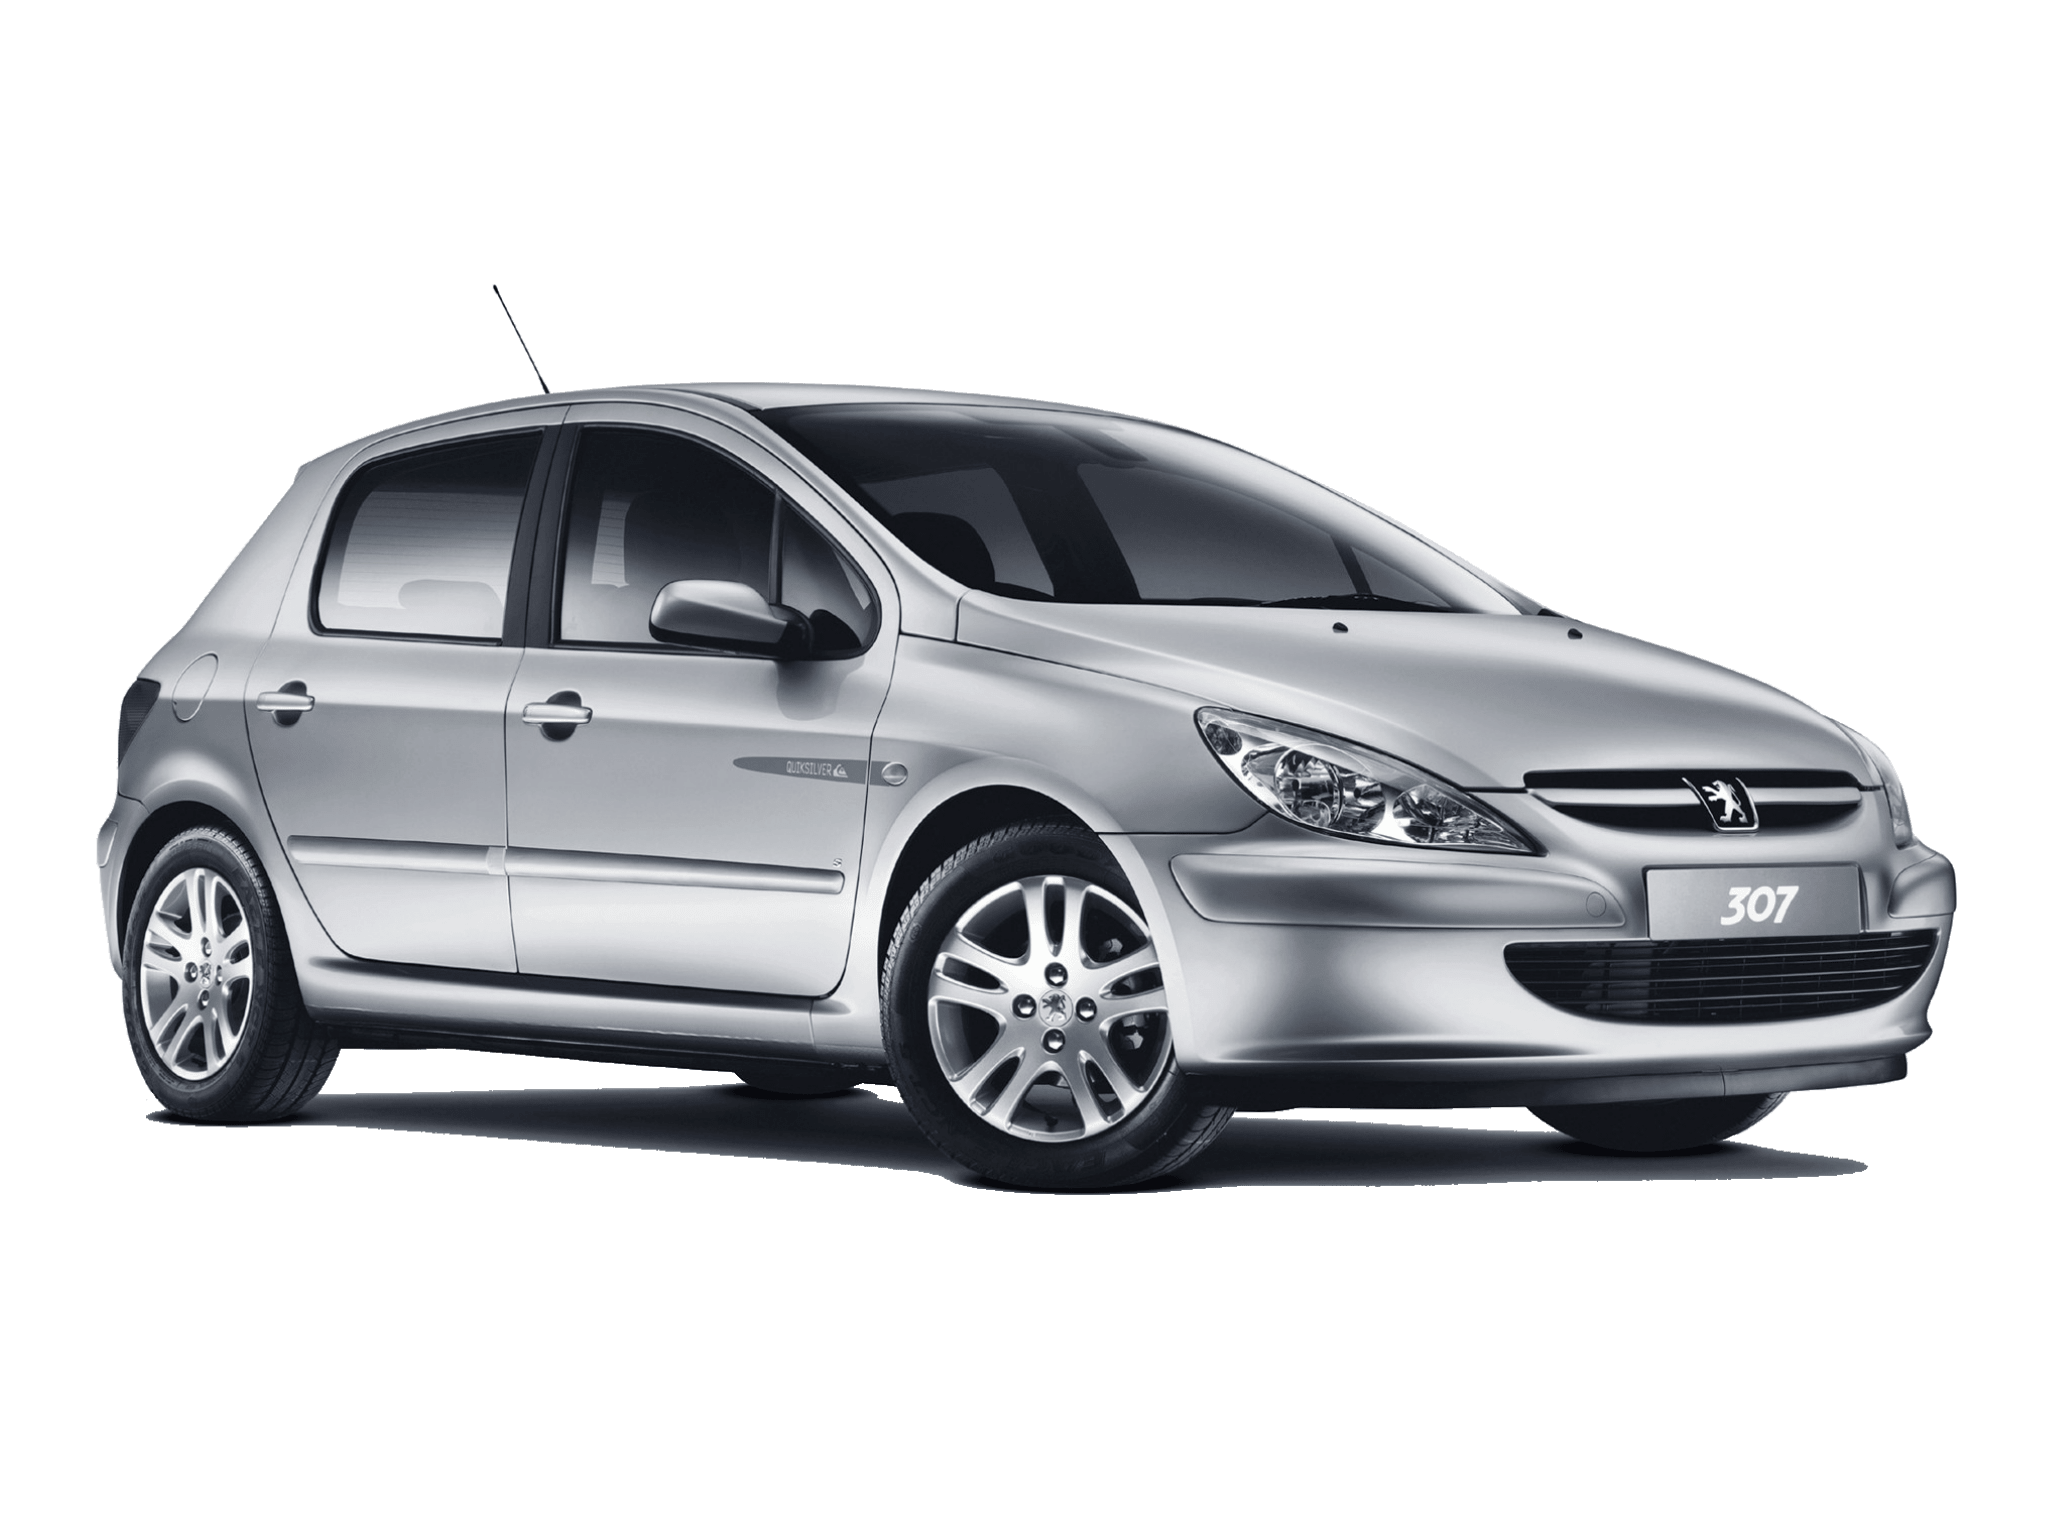 2006 Peugeot 307 XSE review - Drive